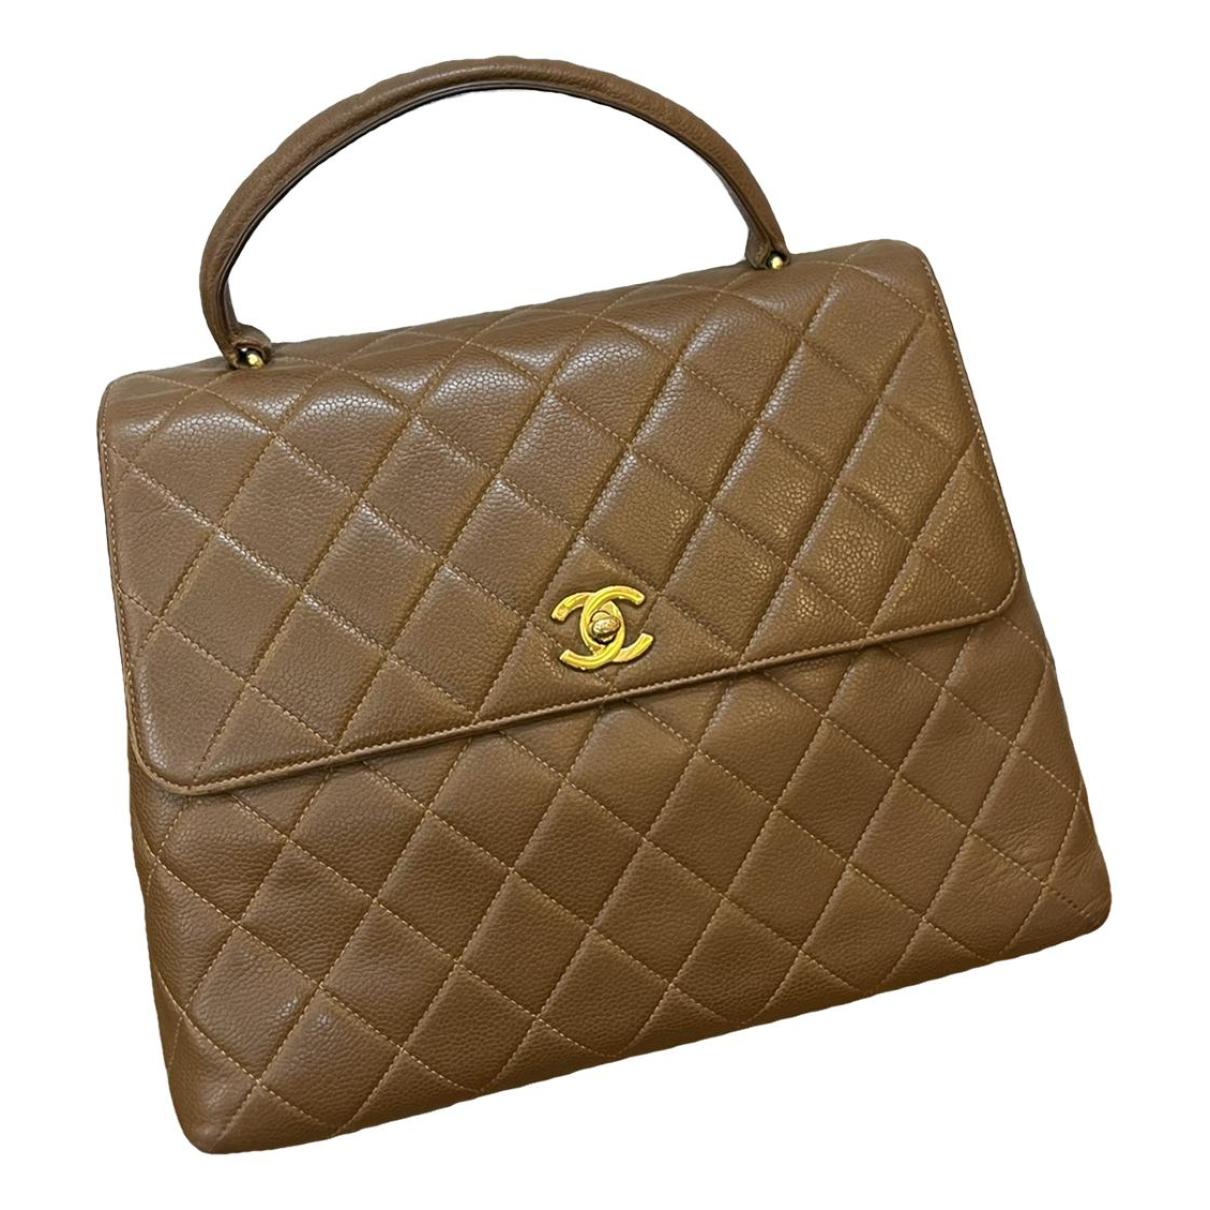 Coco handle leather handbag Chanel Beige in Leather - 31158376